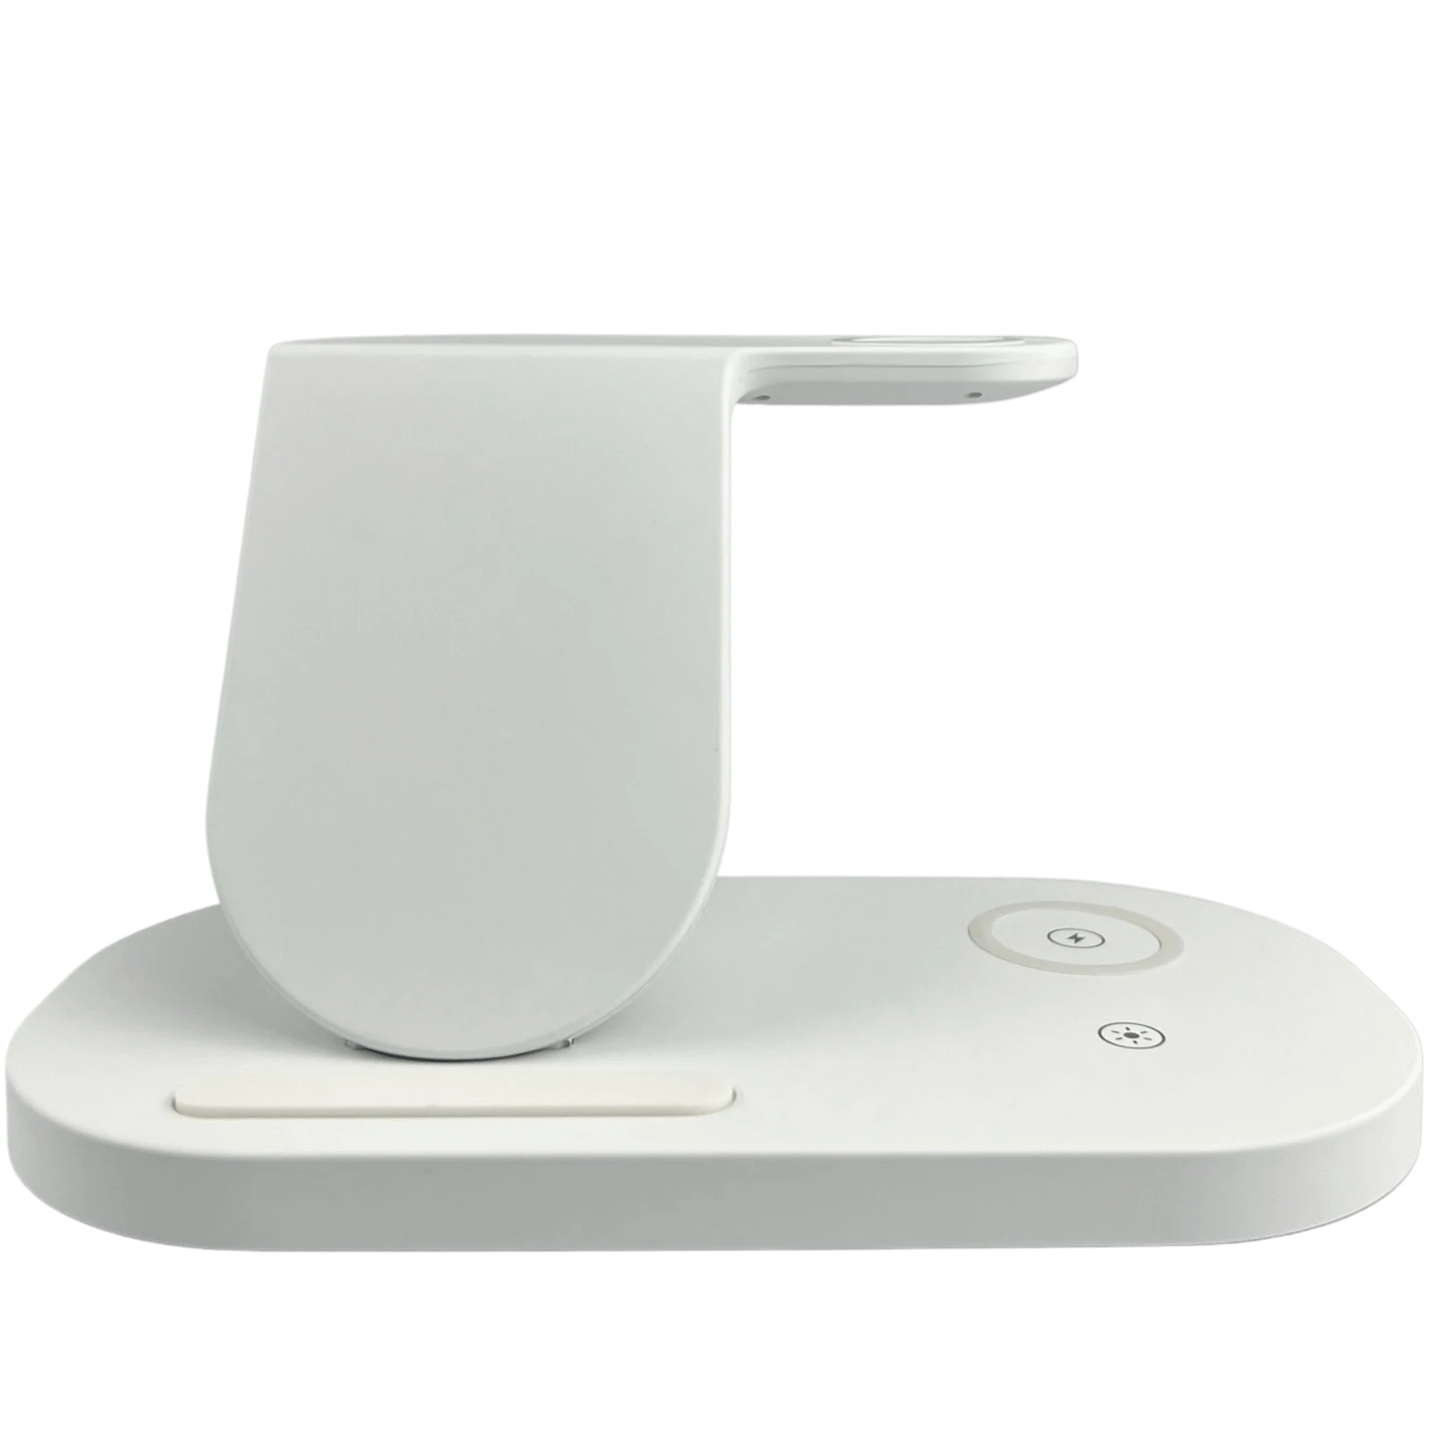 3 in 1 Samsung Wireless Charging Station